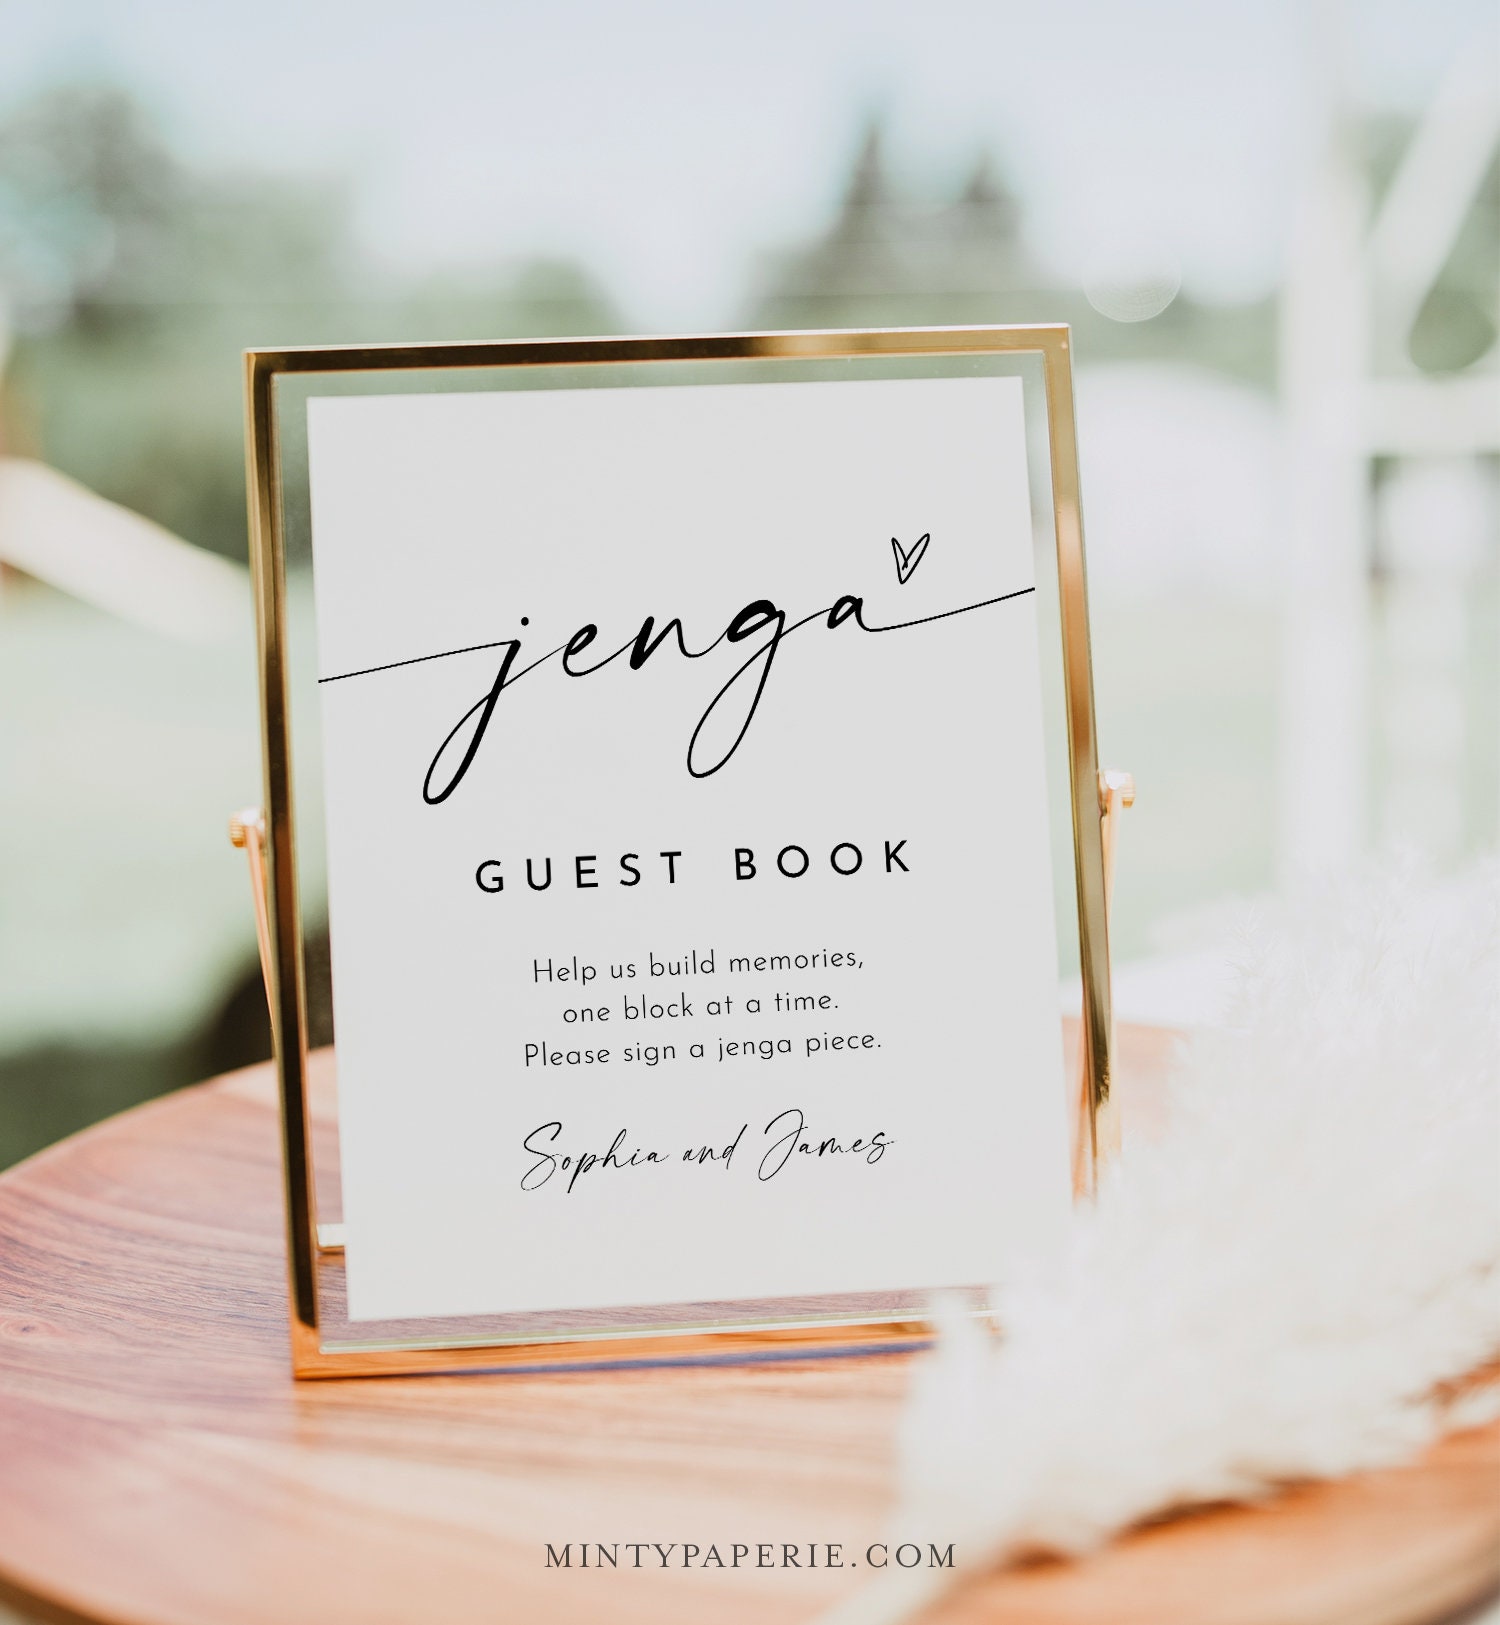 Jenga Guestbook Sign, Editable Template, Printable Guest Book, Minimalist  Wedding Tabletop Sign, Instant Download, Templett 8x10 #0034W-72S